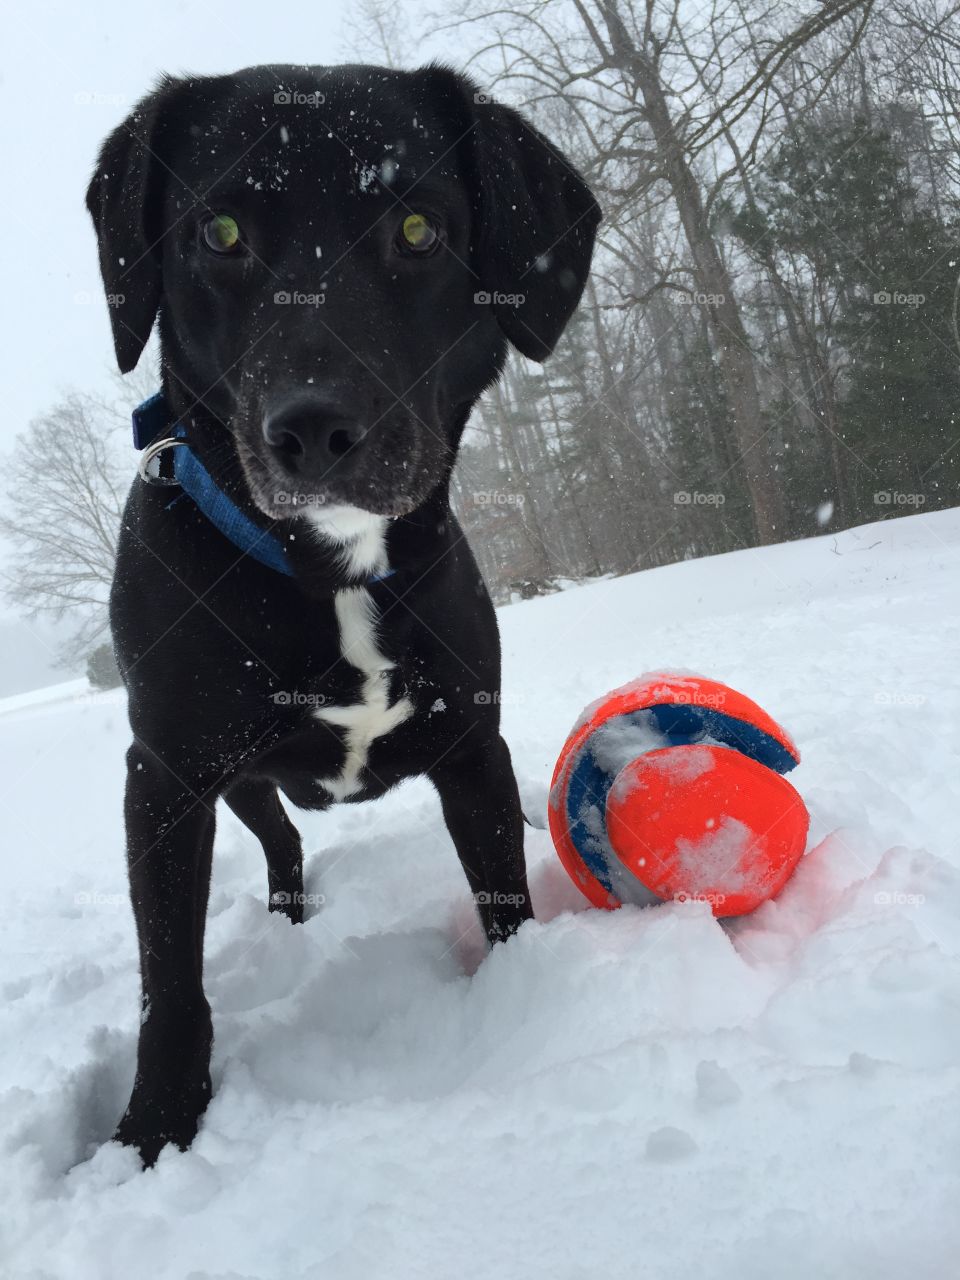 Play!. Puppy is ready for the snow! Just throw that ball and watch him go!